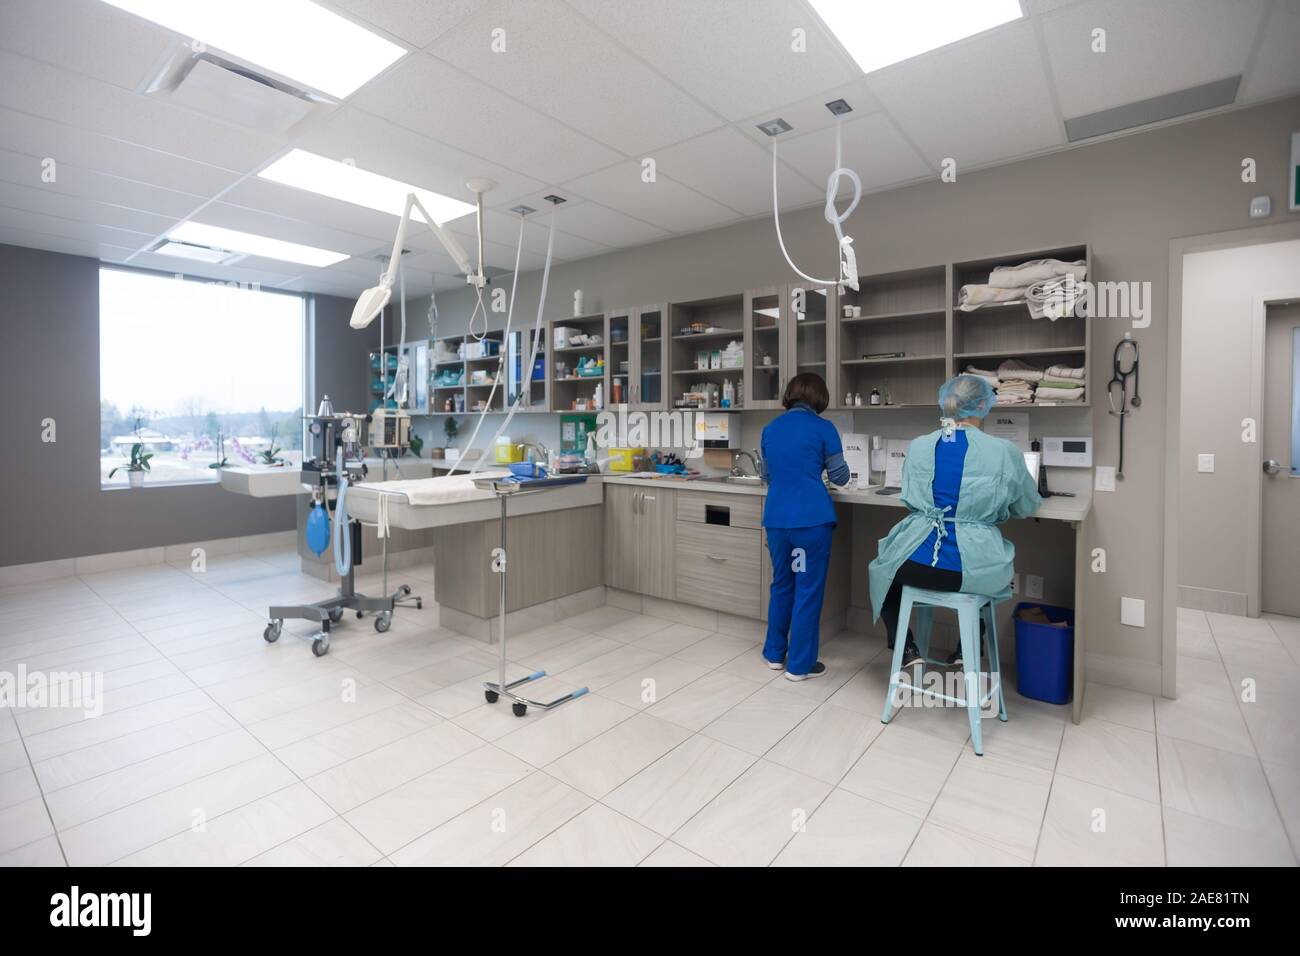 The treatment and assessment area inside a veterinary clinic. Stock Photo